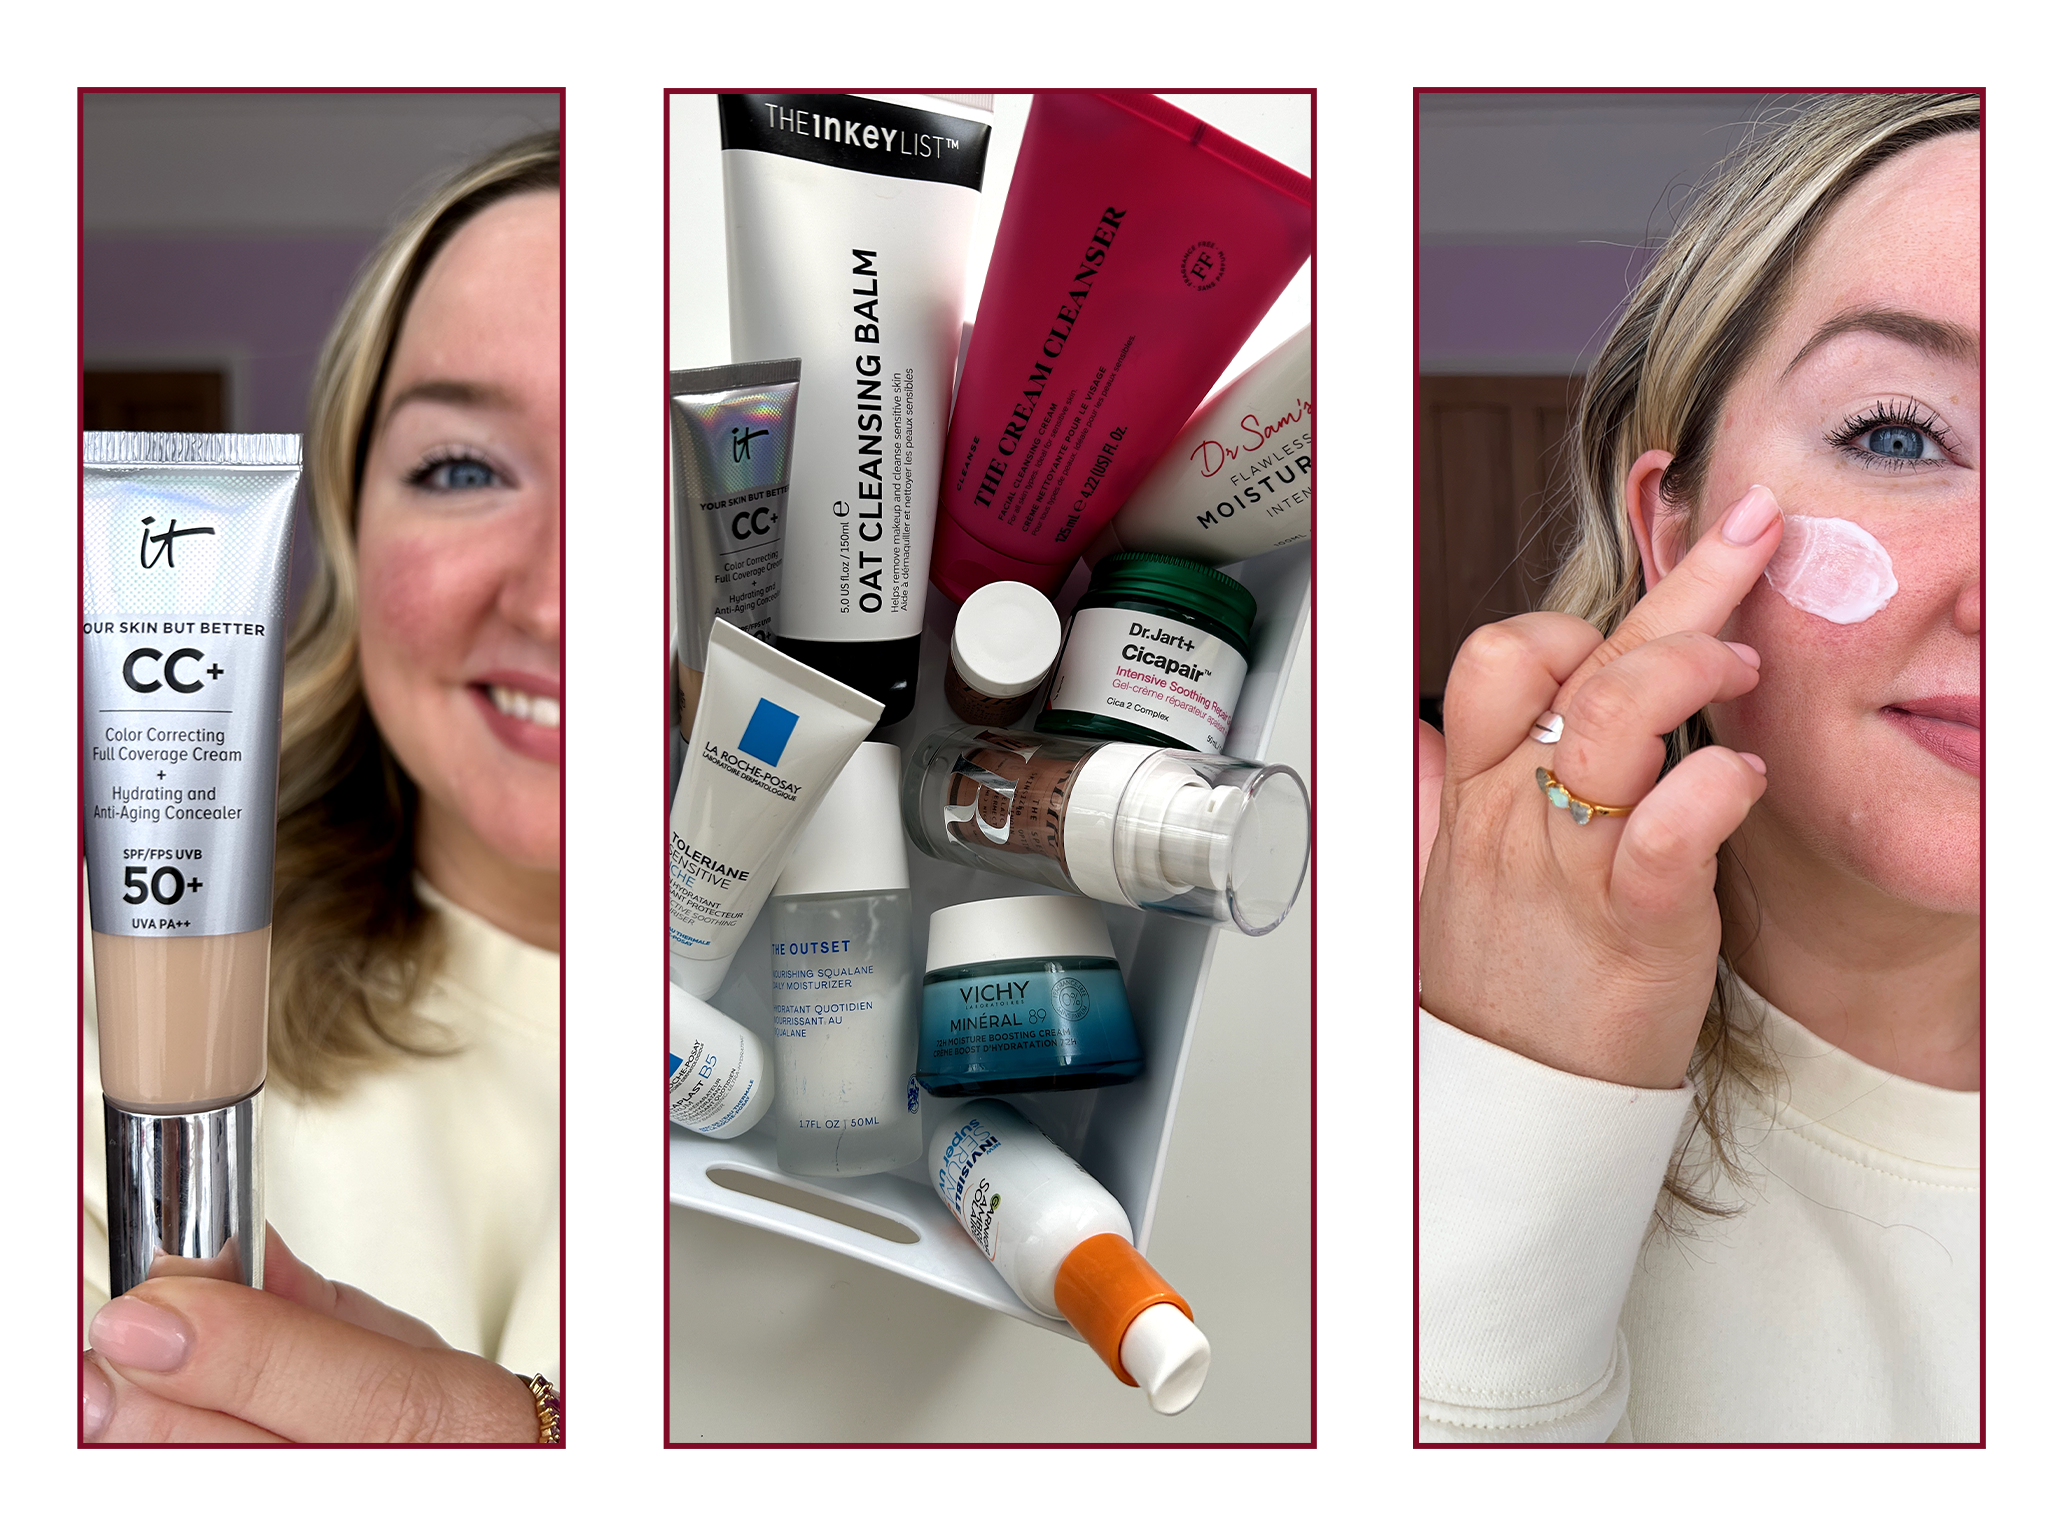 Our tester in action with the tried and tested rosacea products